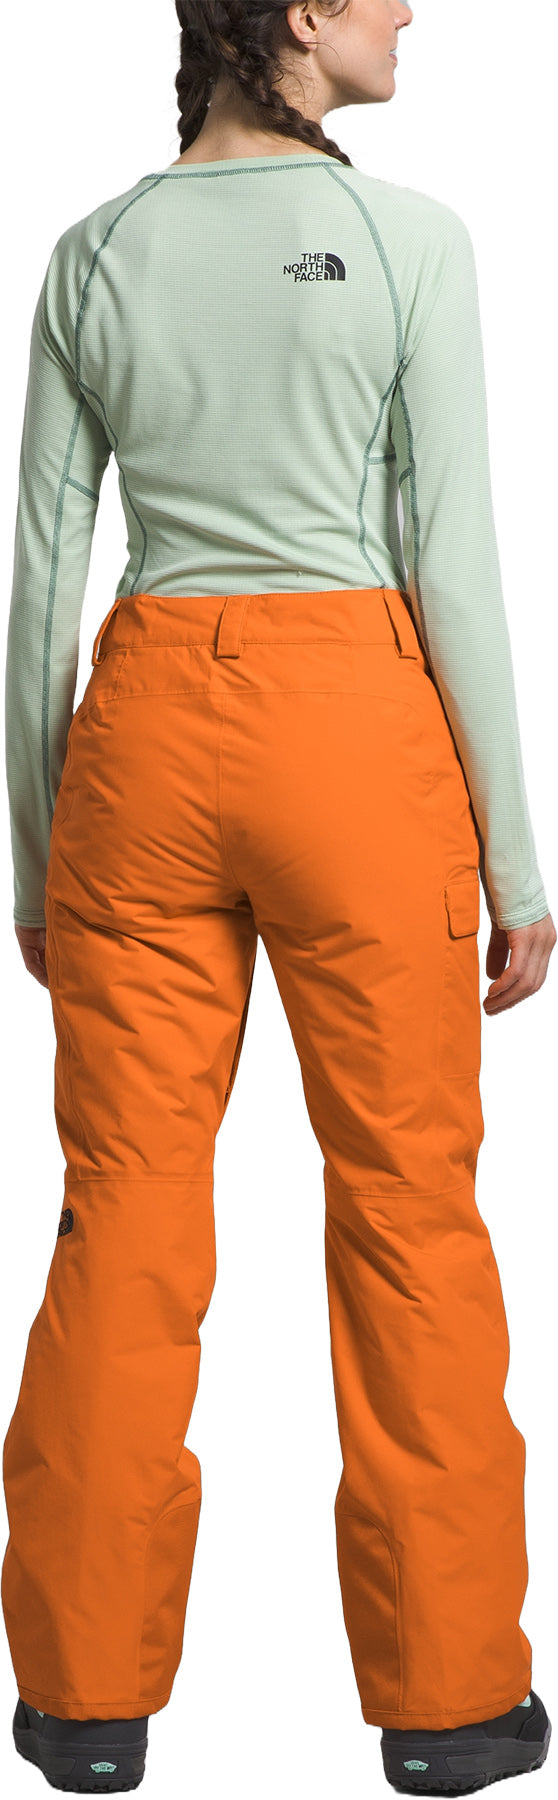 The North Face Freedom LRBC Insulated Pants - Women's - Free